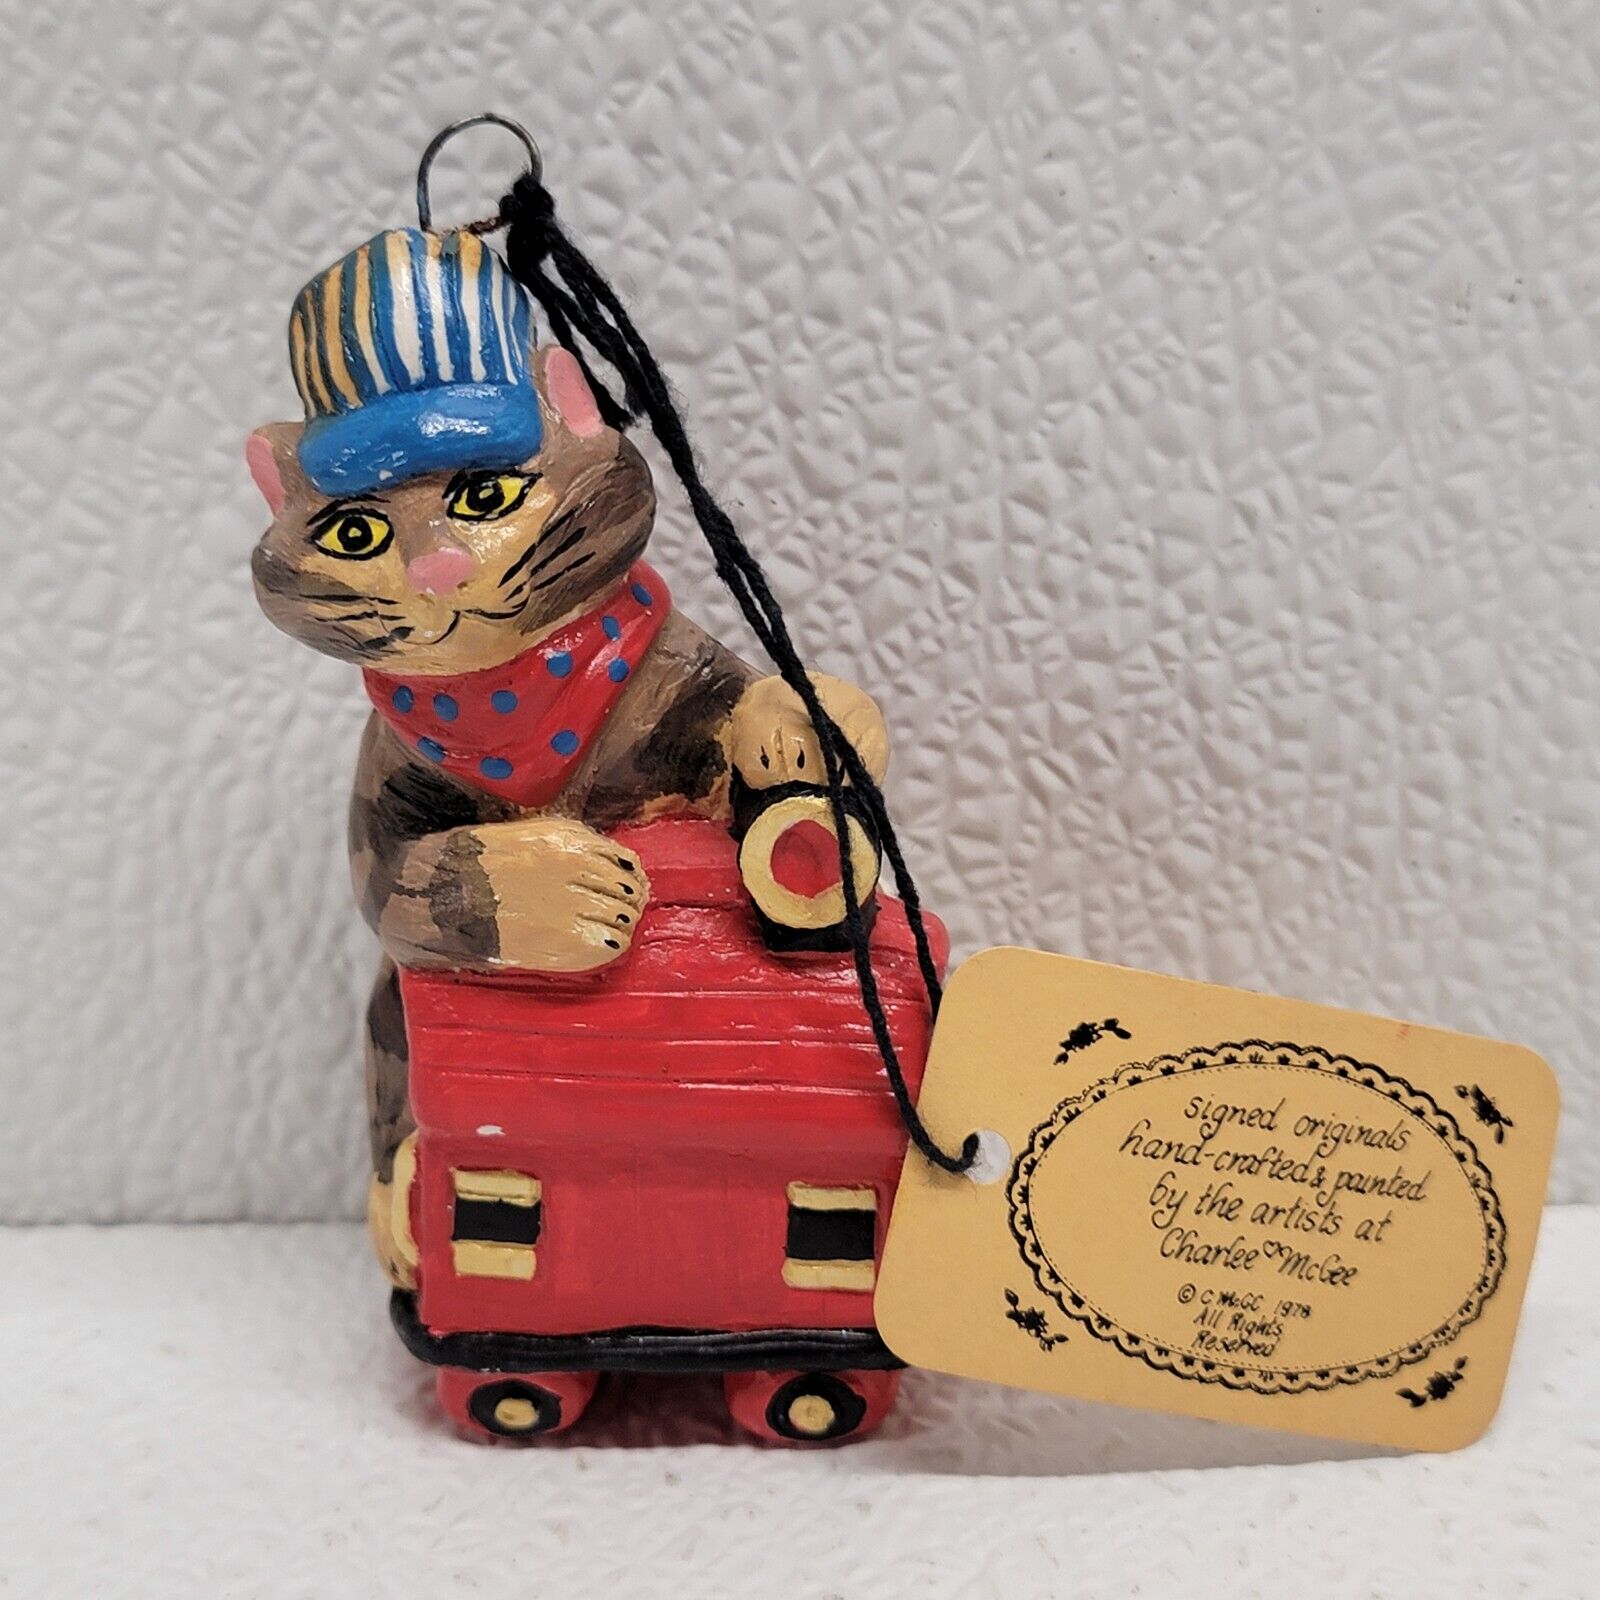 Vintage 1978 Charlee McGee Art Christmas Ornament Cat With Train - Original Tag